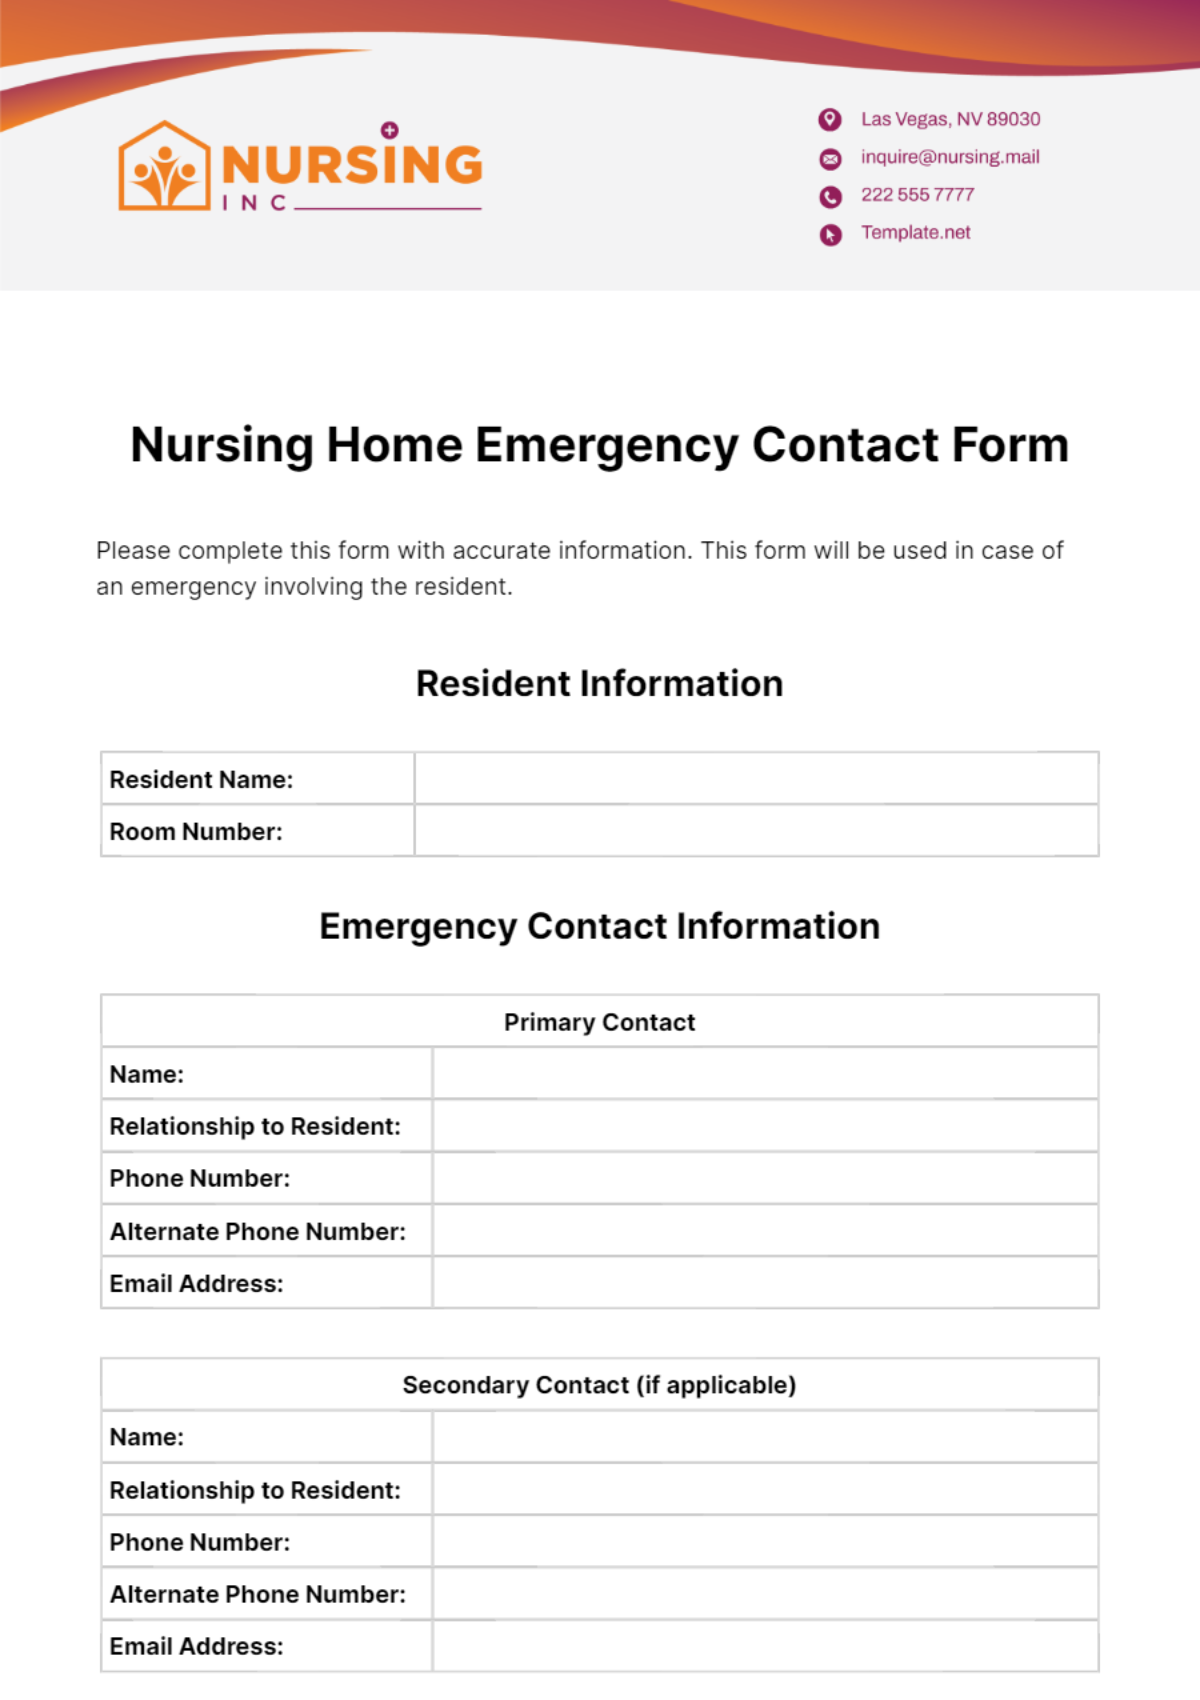 Nursing Home Emergency Contact Form Template